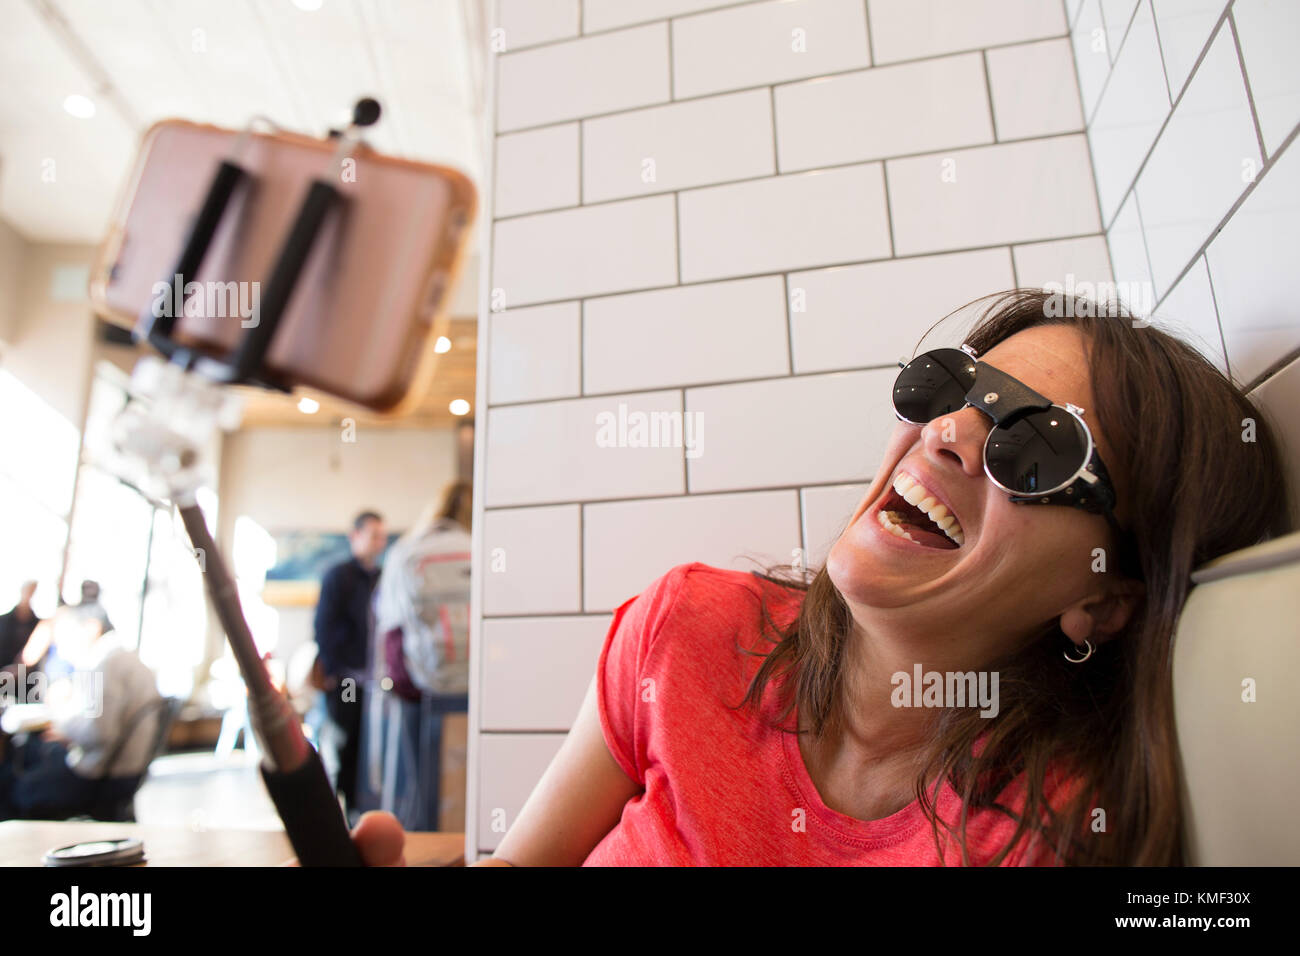 Woman laughing while taking selfie in cafe with selfie stick,Santa Cruz,California,USA Stock Photo